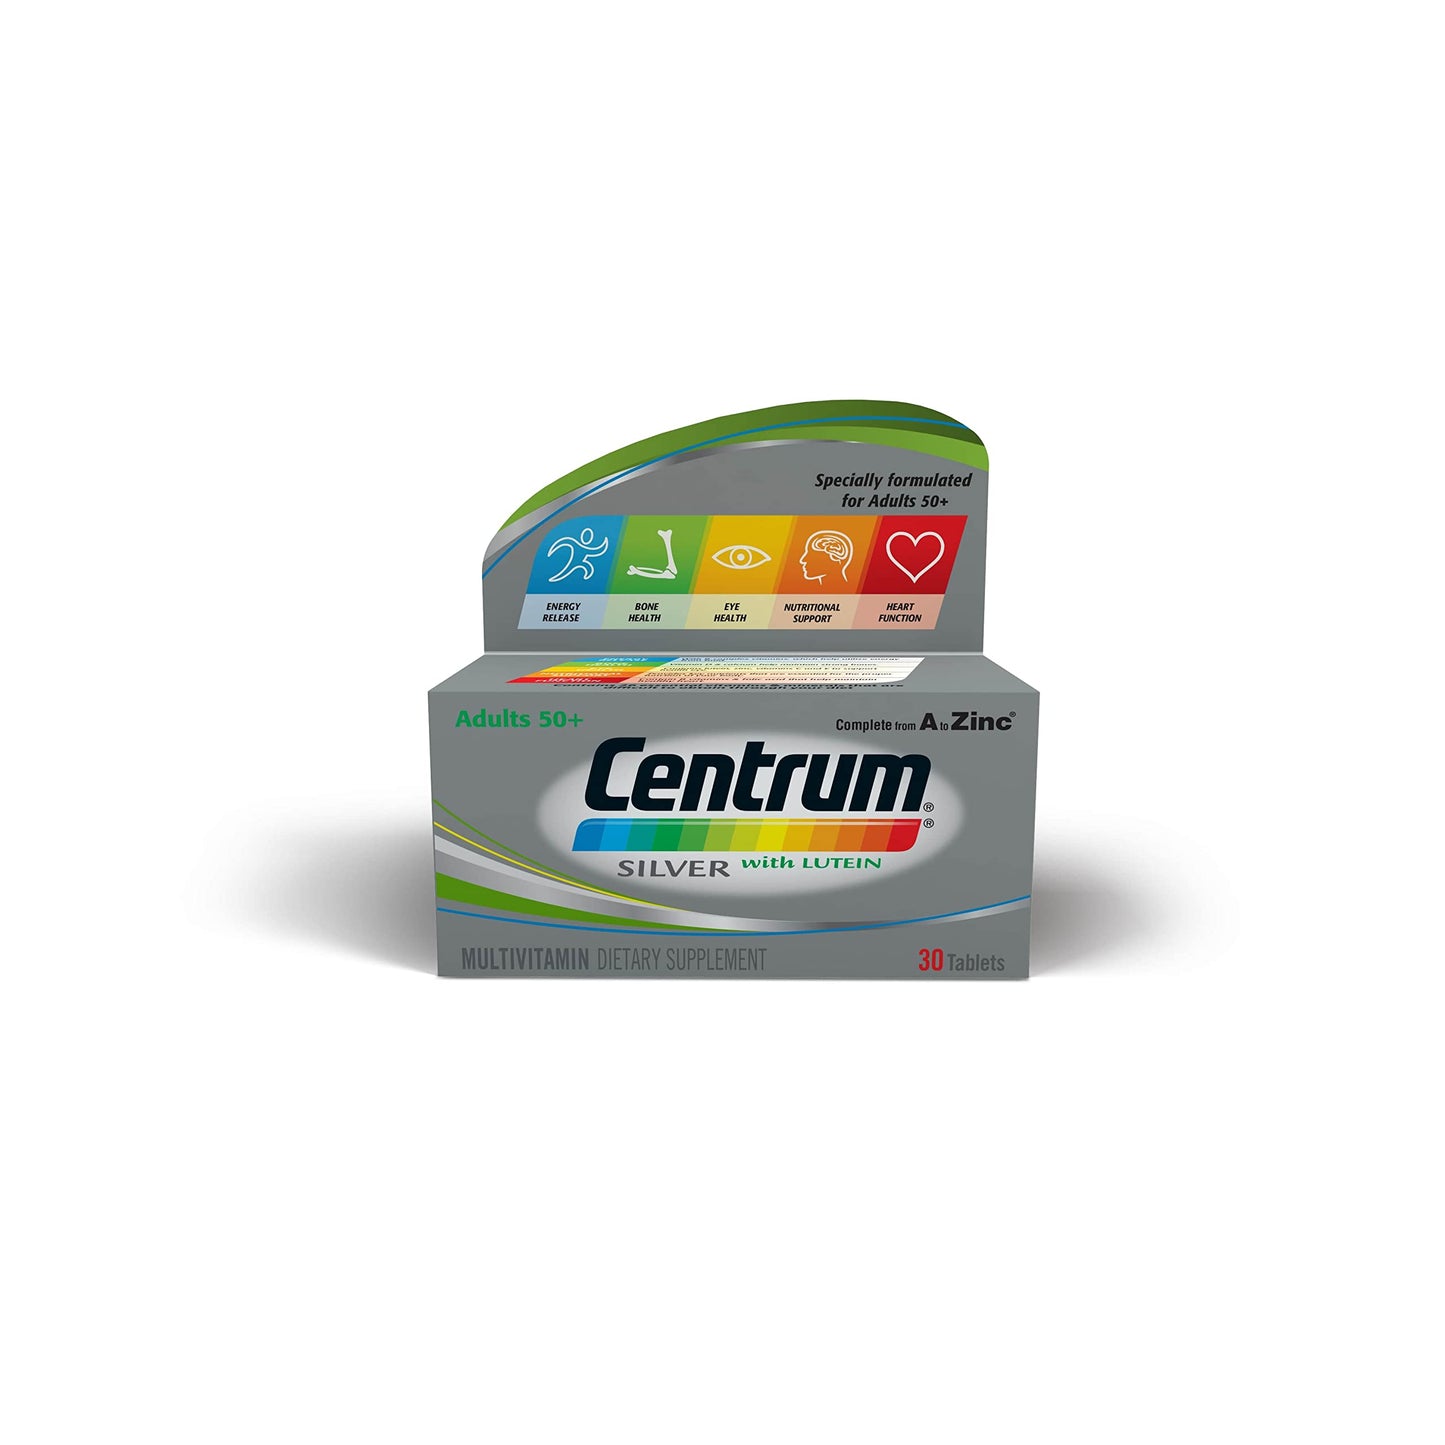 Centrum Silver with Lutein Multivitamin Tablets, Multimineral Supplements, for Adults 50 + with Zinc, Vitamin B, D & Magnesium,30 ct.